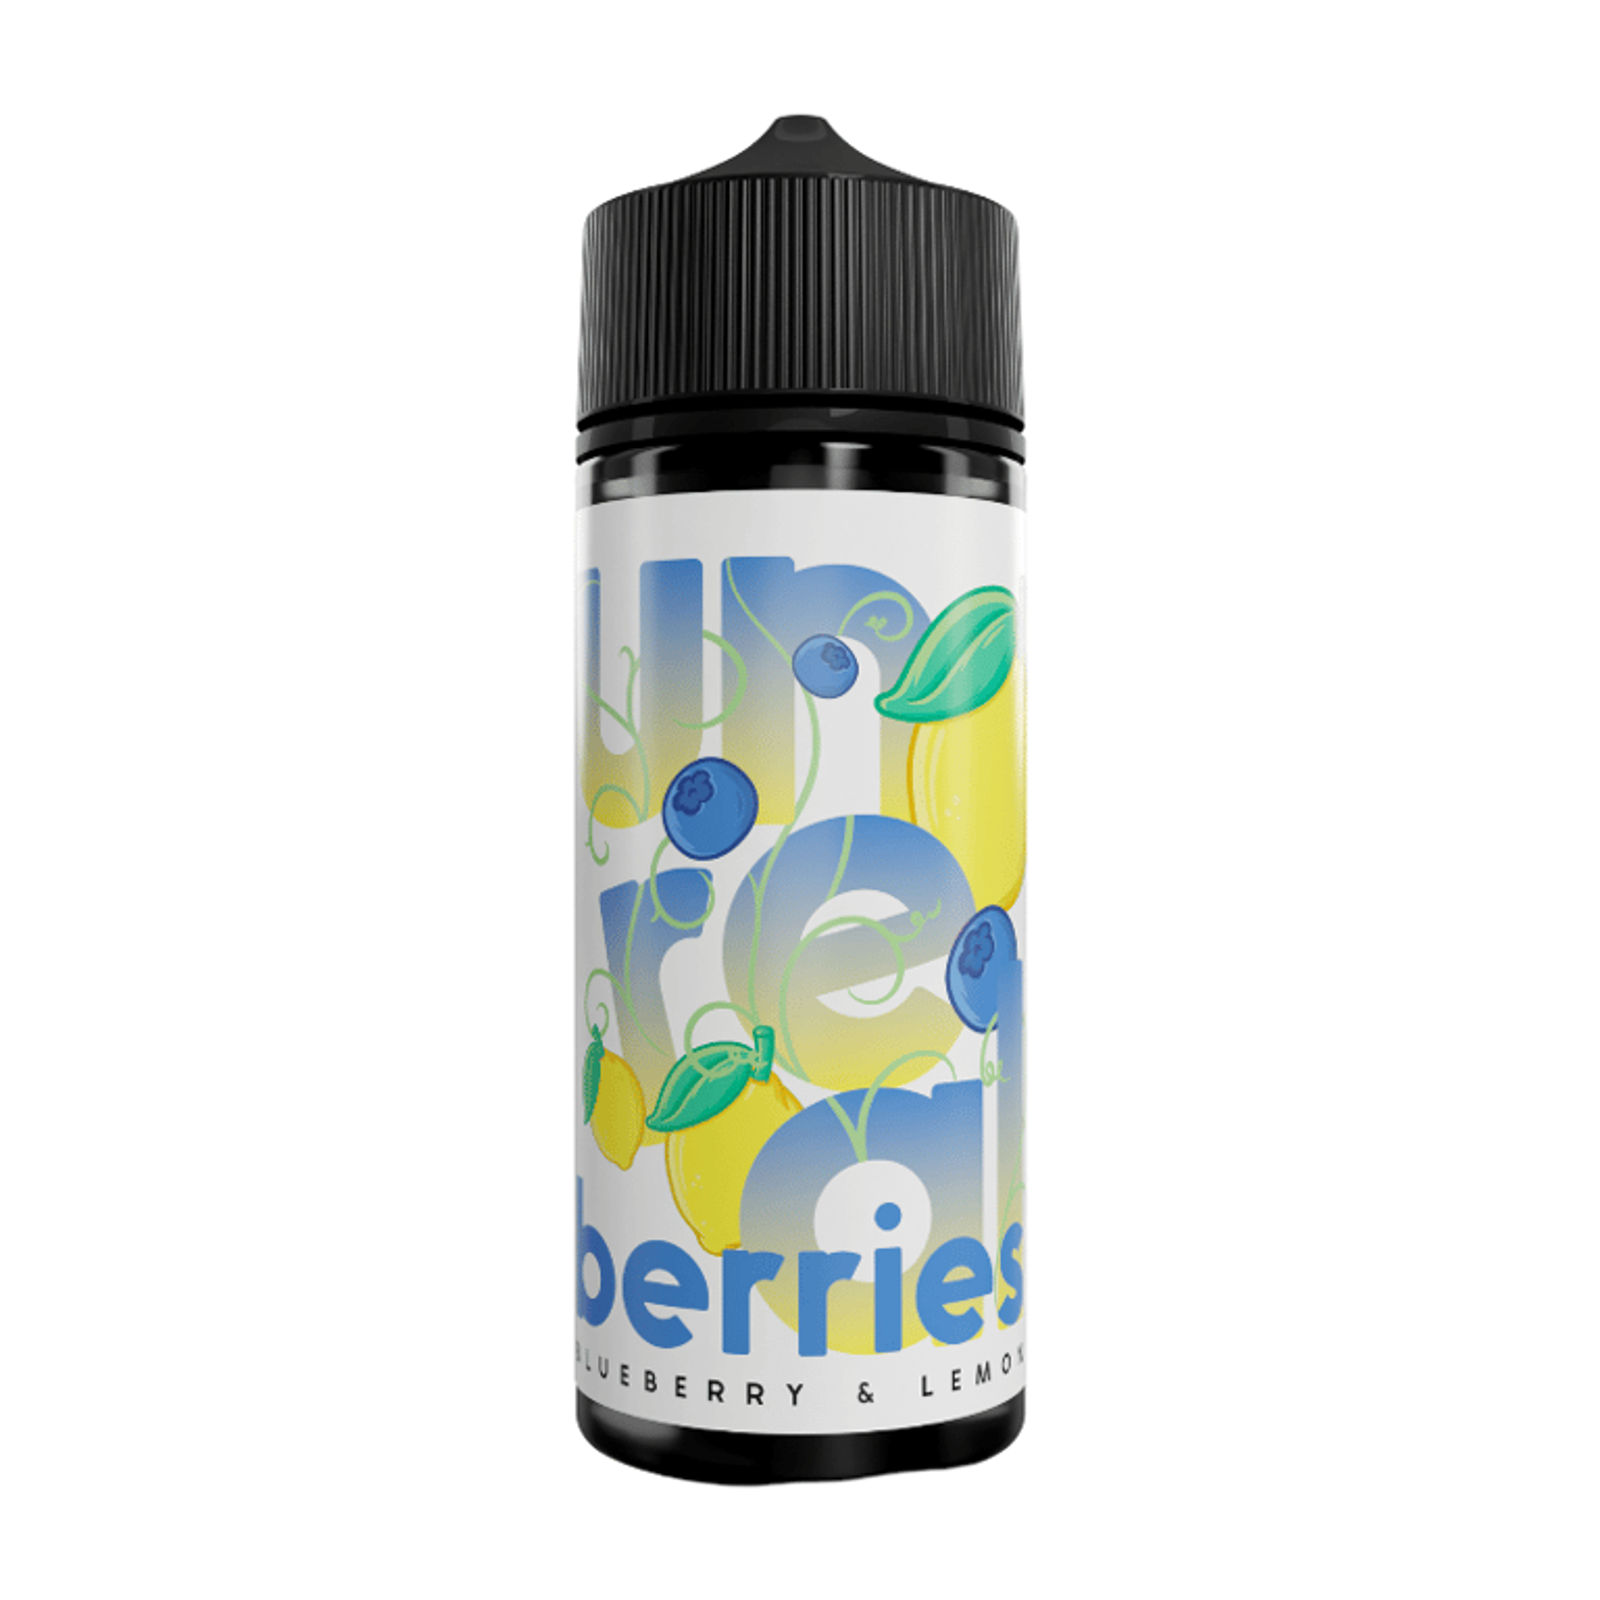 BLUEBERRY-and-LEMON-UNREAL-BERRIES-JACK-RABBIT-100ML-00MG-main-0.png